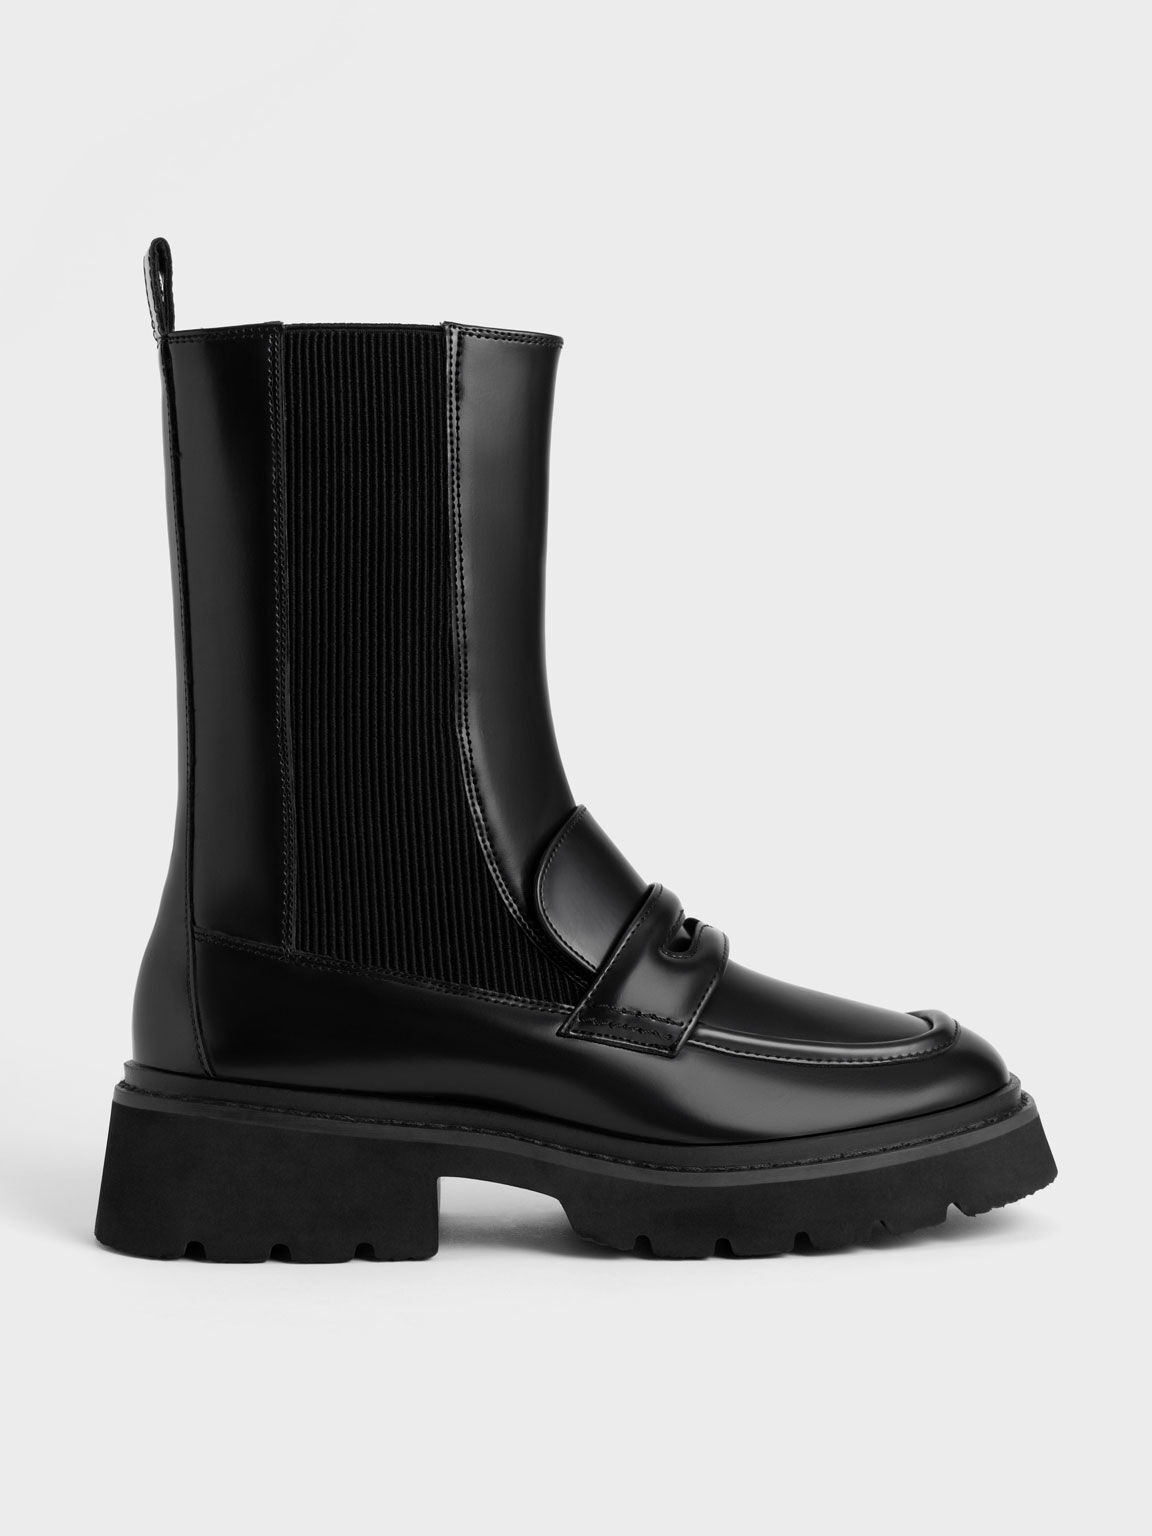 Black Penny Loafer Chelsea Boots - CHARLES & KEITH US